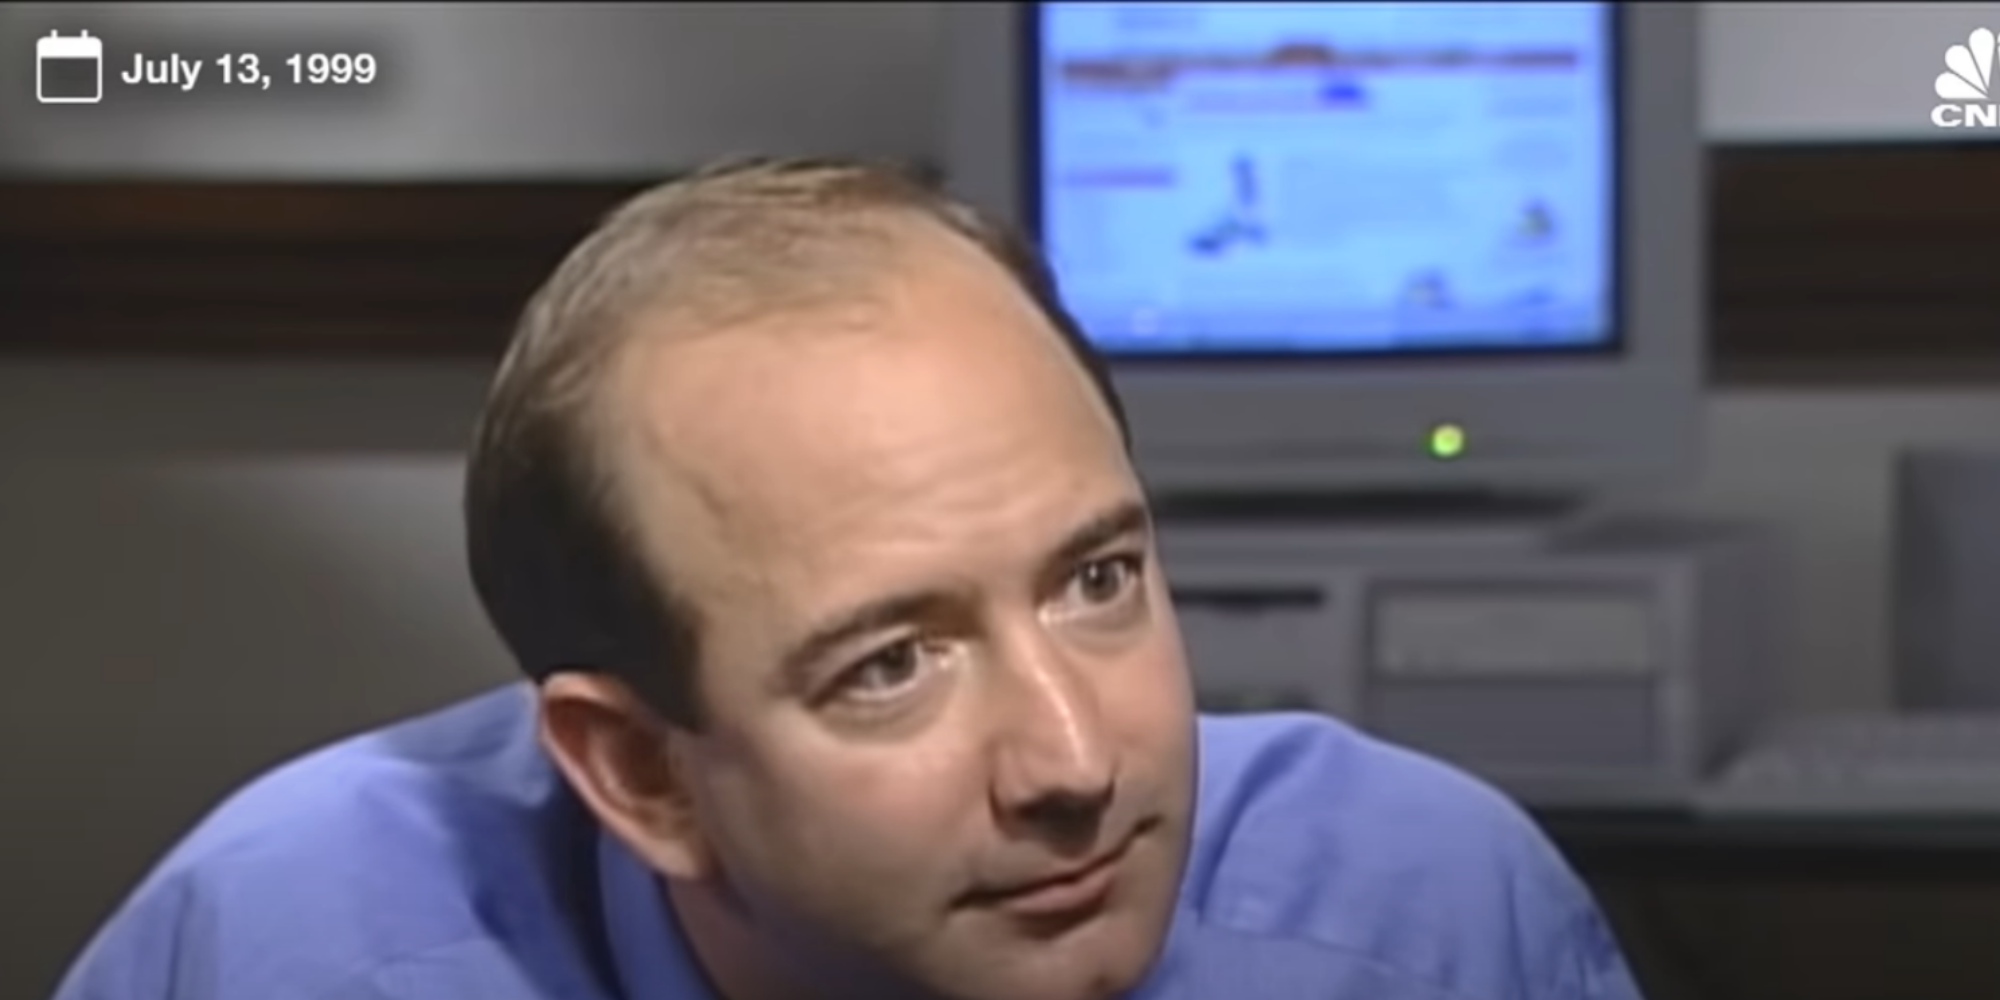 Jeff Bezos Clip Of Amazon Owner Talking About Online Shopping In 1999 Resurfaces Indy100 Indy100 jeff bezos clip of amazon owner